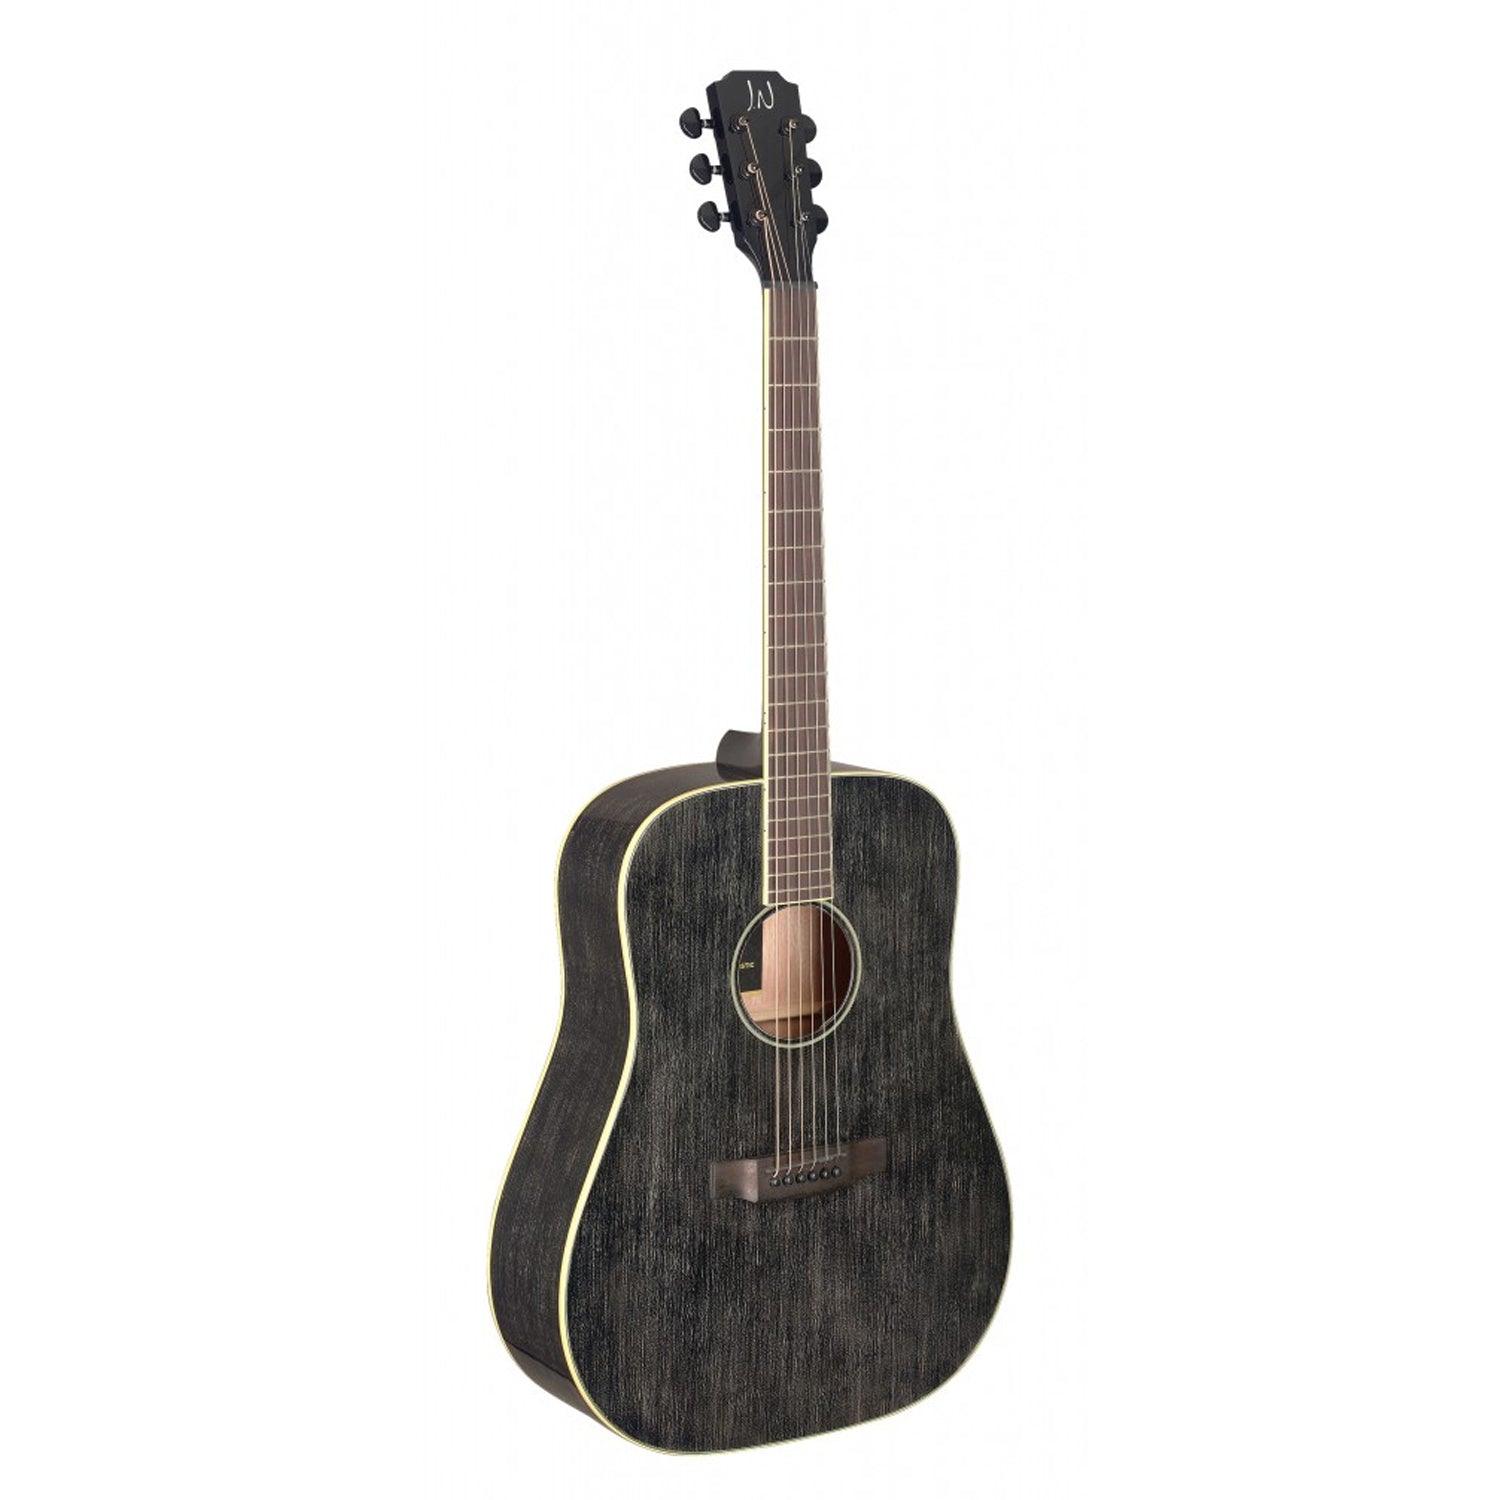 J.N.Guitars YAK-D Acoustic Dreadnought Guitar with Solid Mahogany Top, Yakisugi series - DY Pro Audio